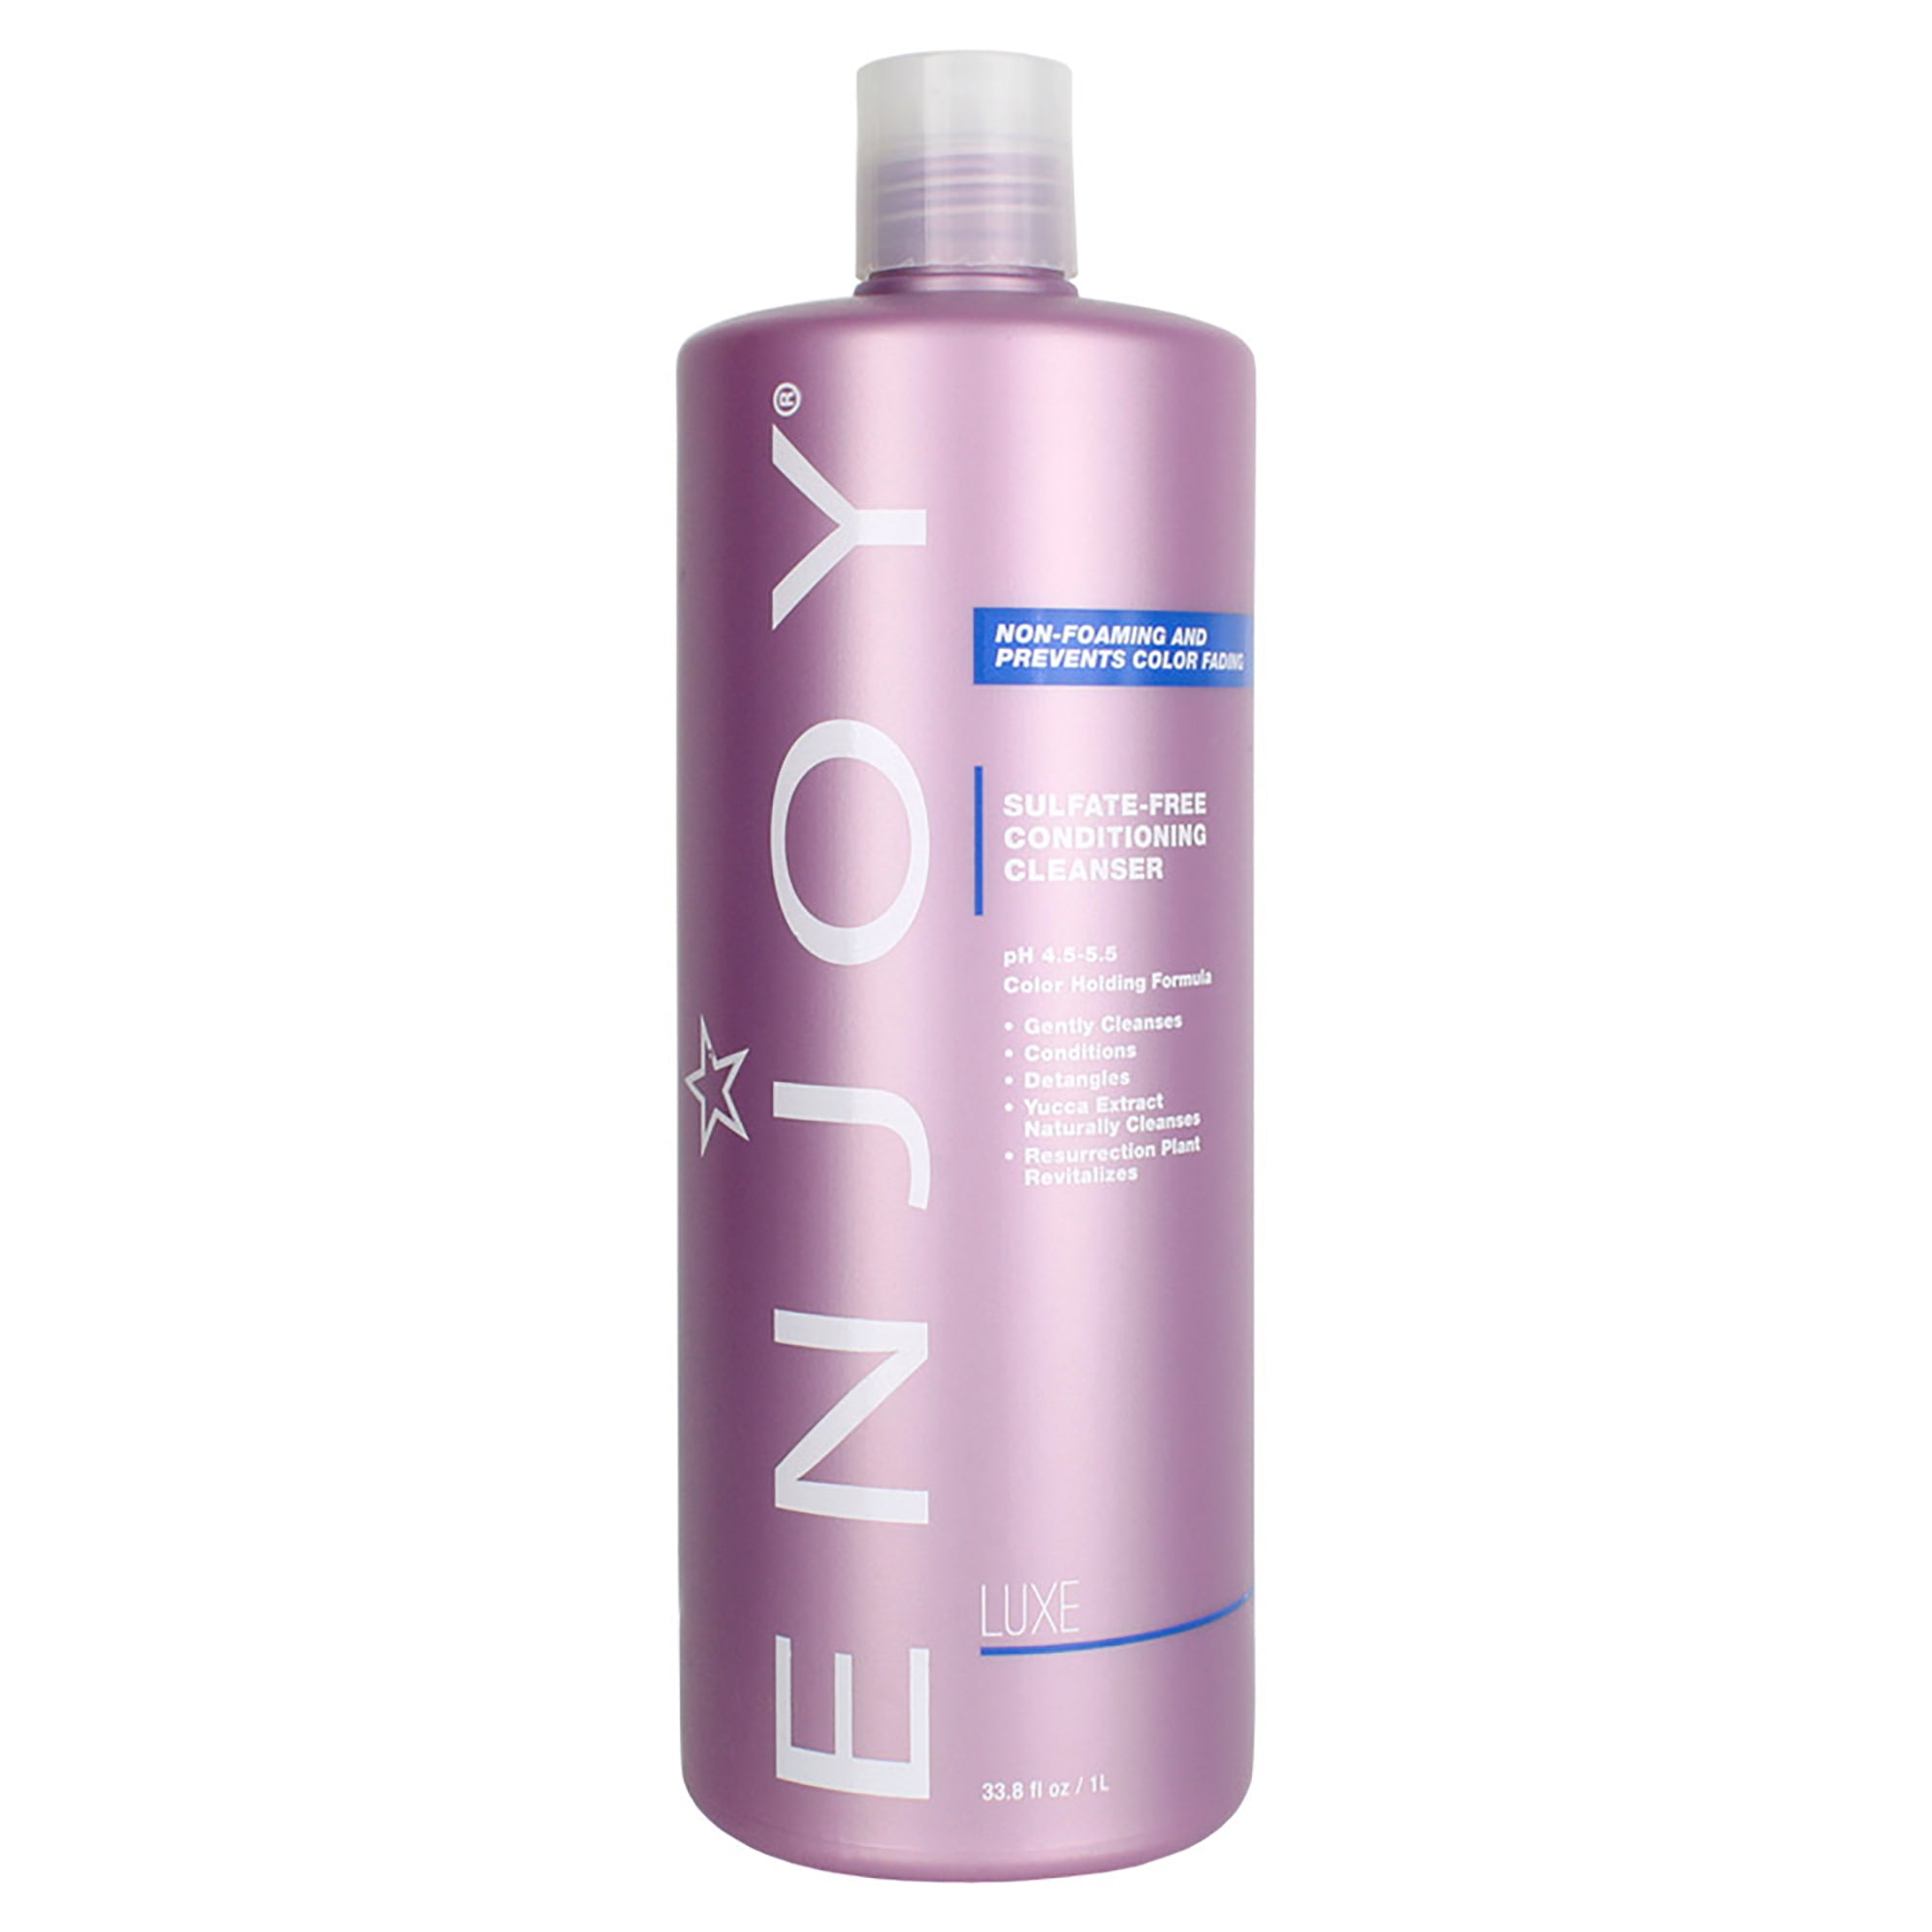 Enjoy Luxe Sulfate-Free Conditioning Cleanser / 32 OZ